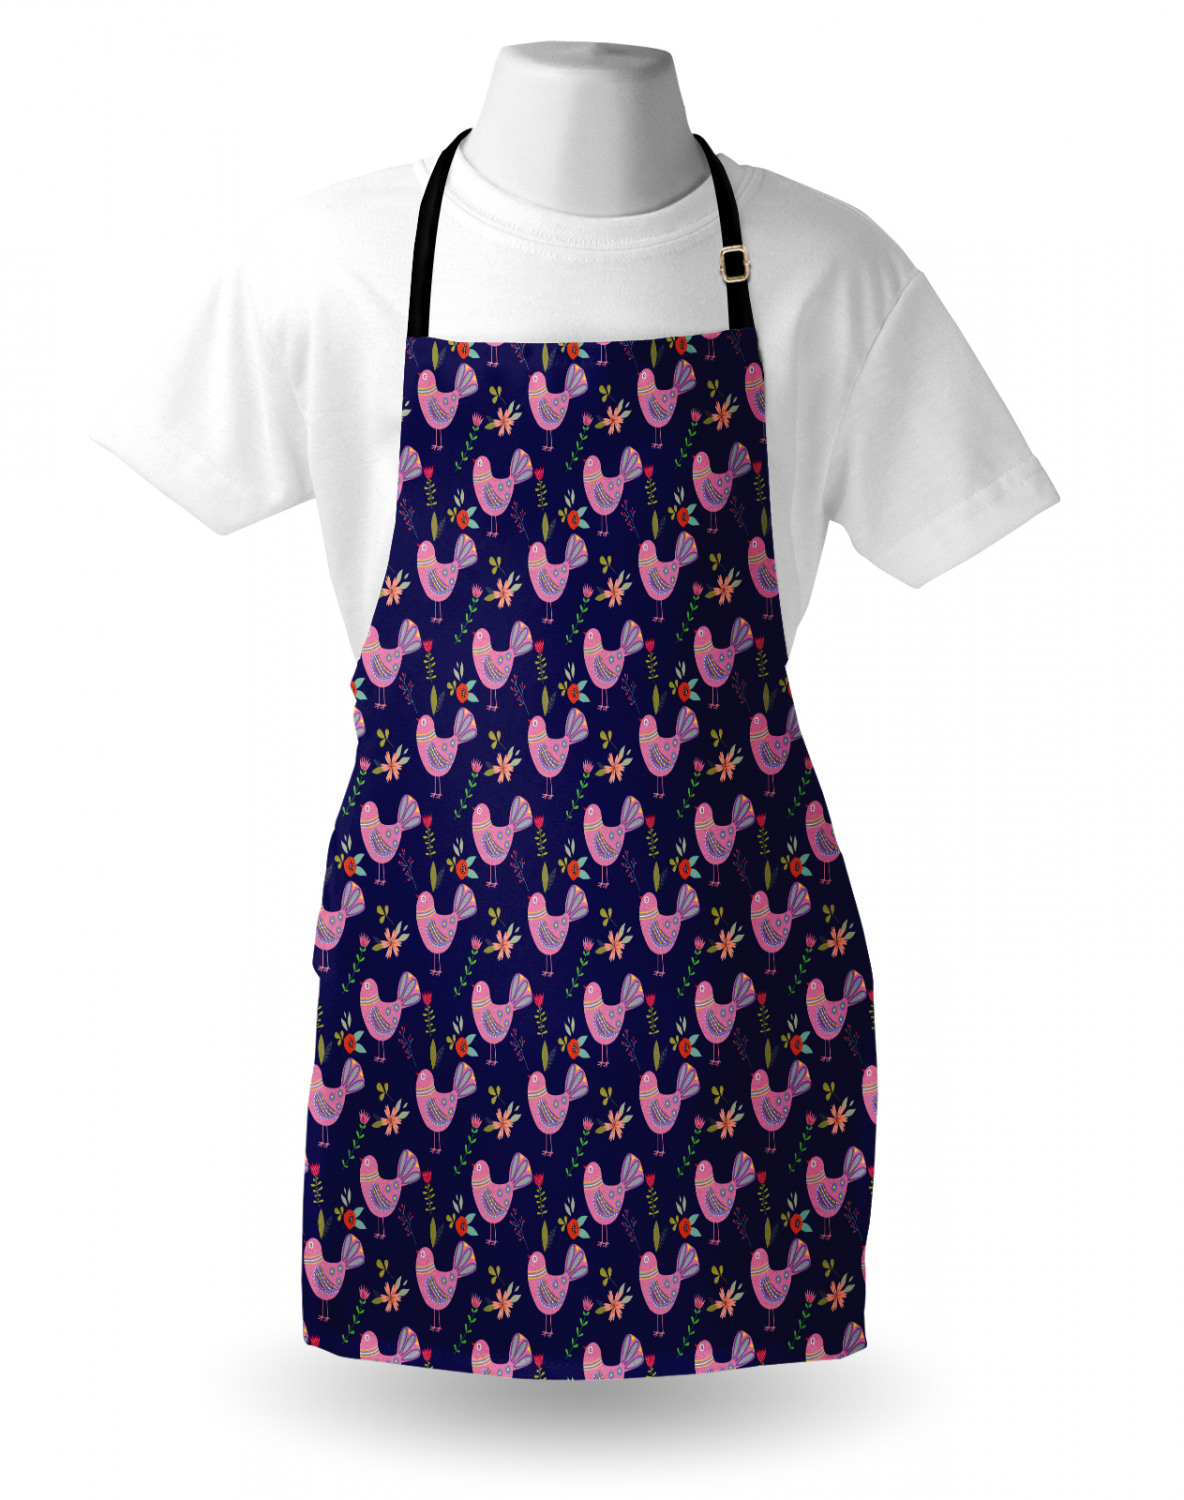 Details about   Ambesonne Apron Bib with Adjustable Neck Strap for Garden Cooking Standard Size 